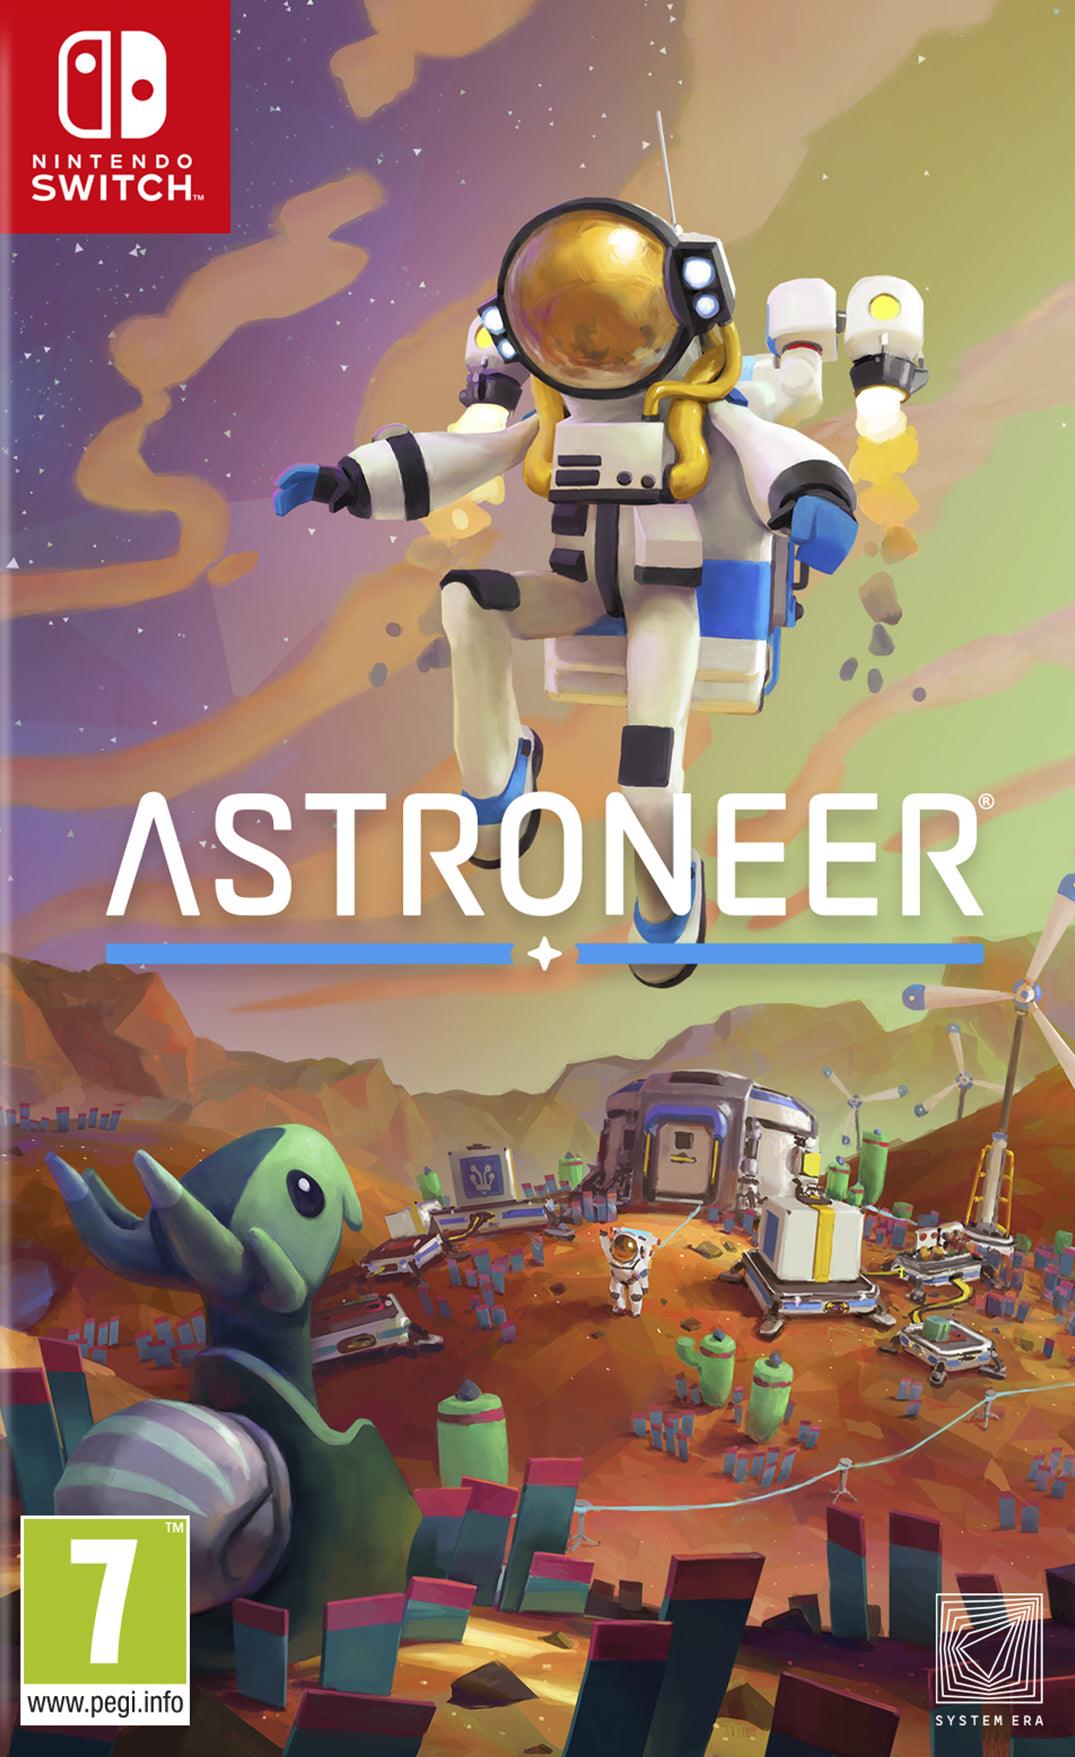 Astroneer - Want a New Gadget